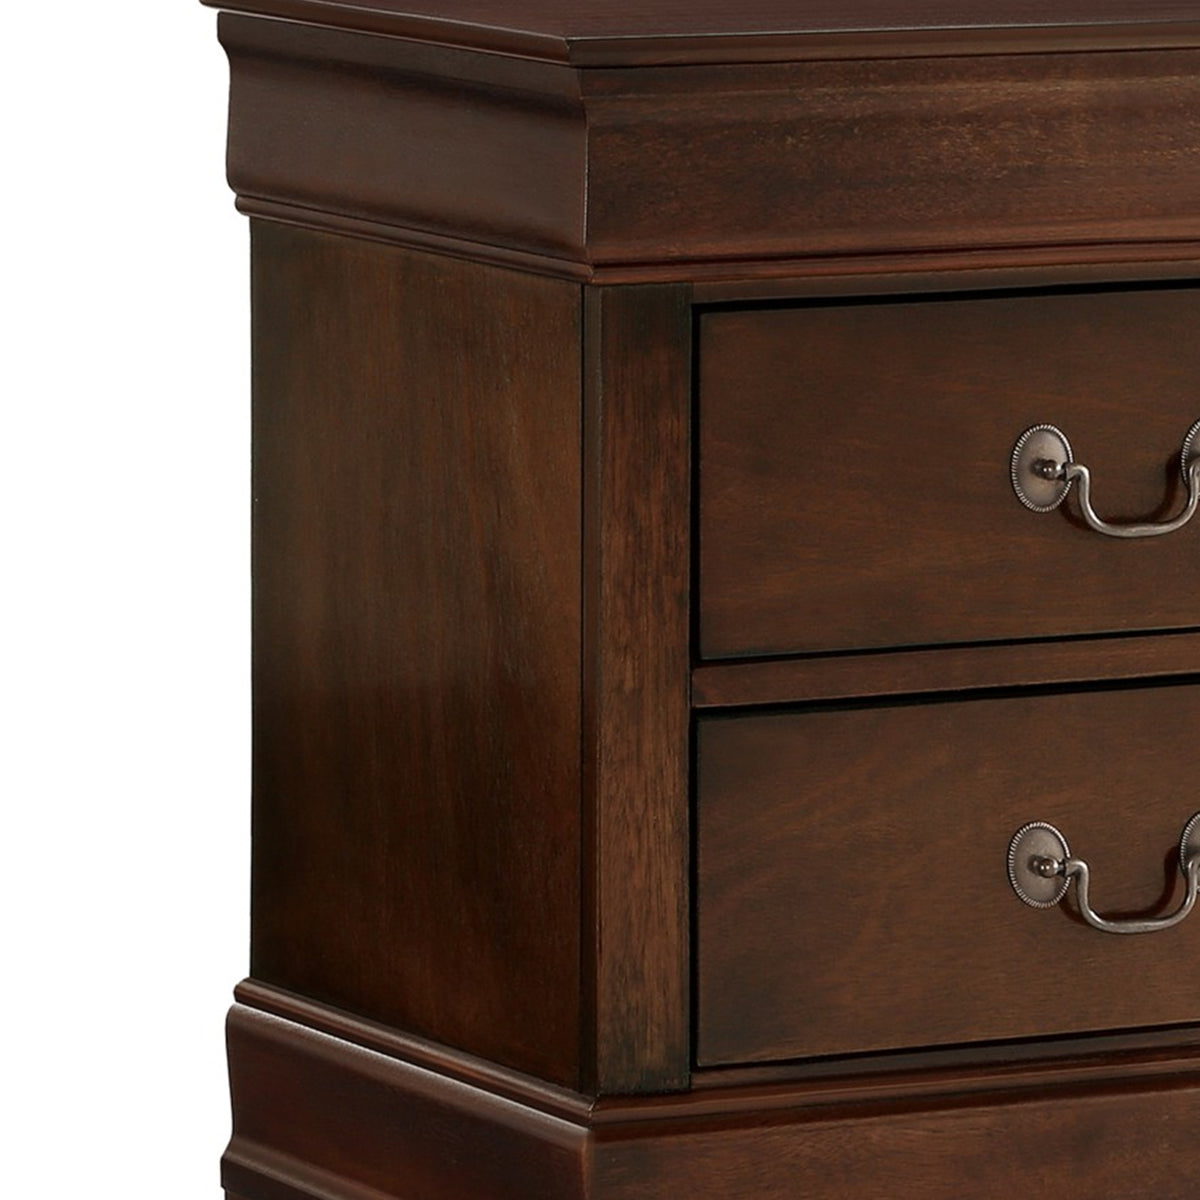 Wooden Night Stand With Curvy Handle Drawer Cherry Brown - BM174482